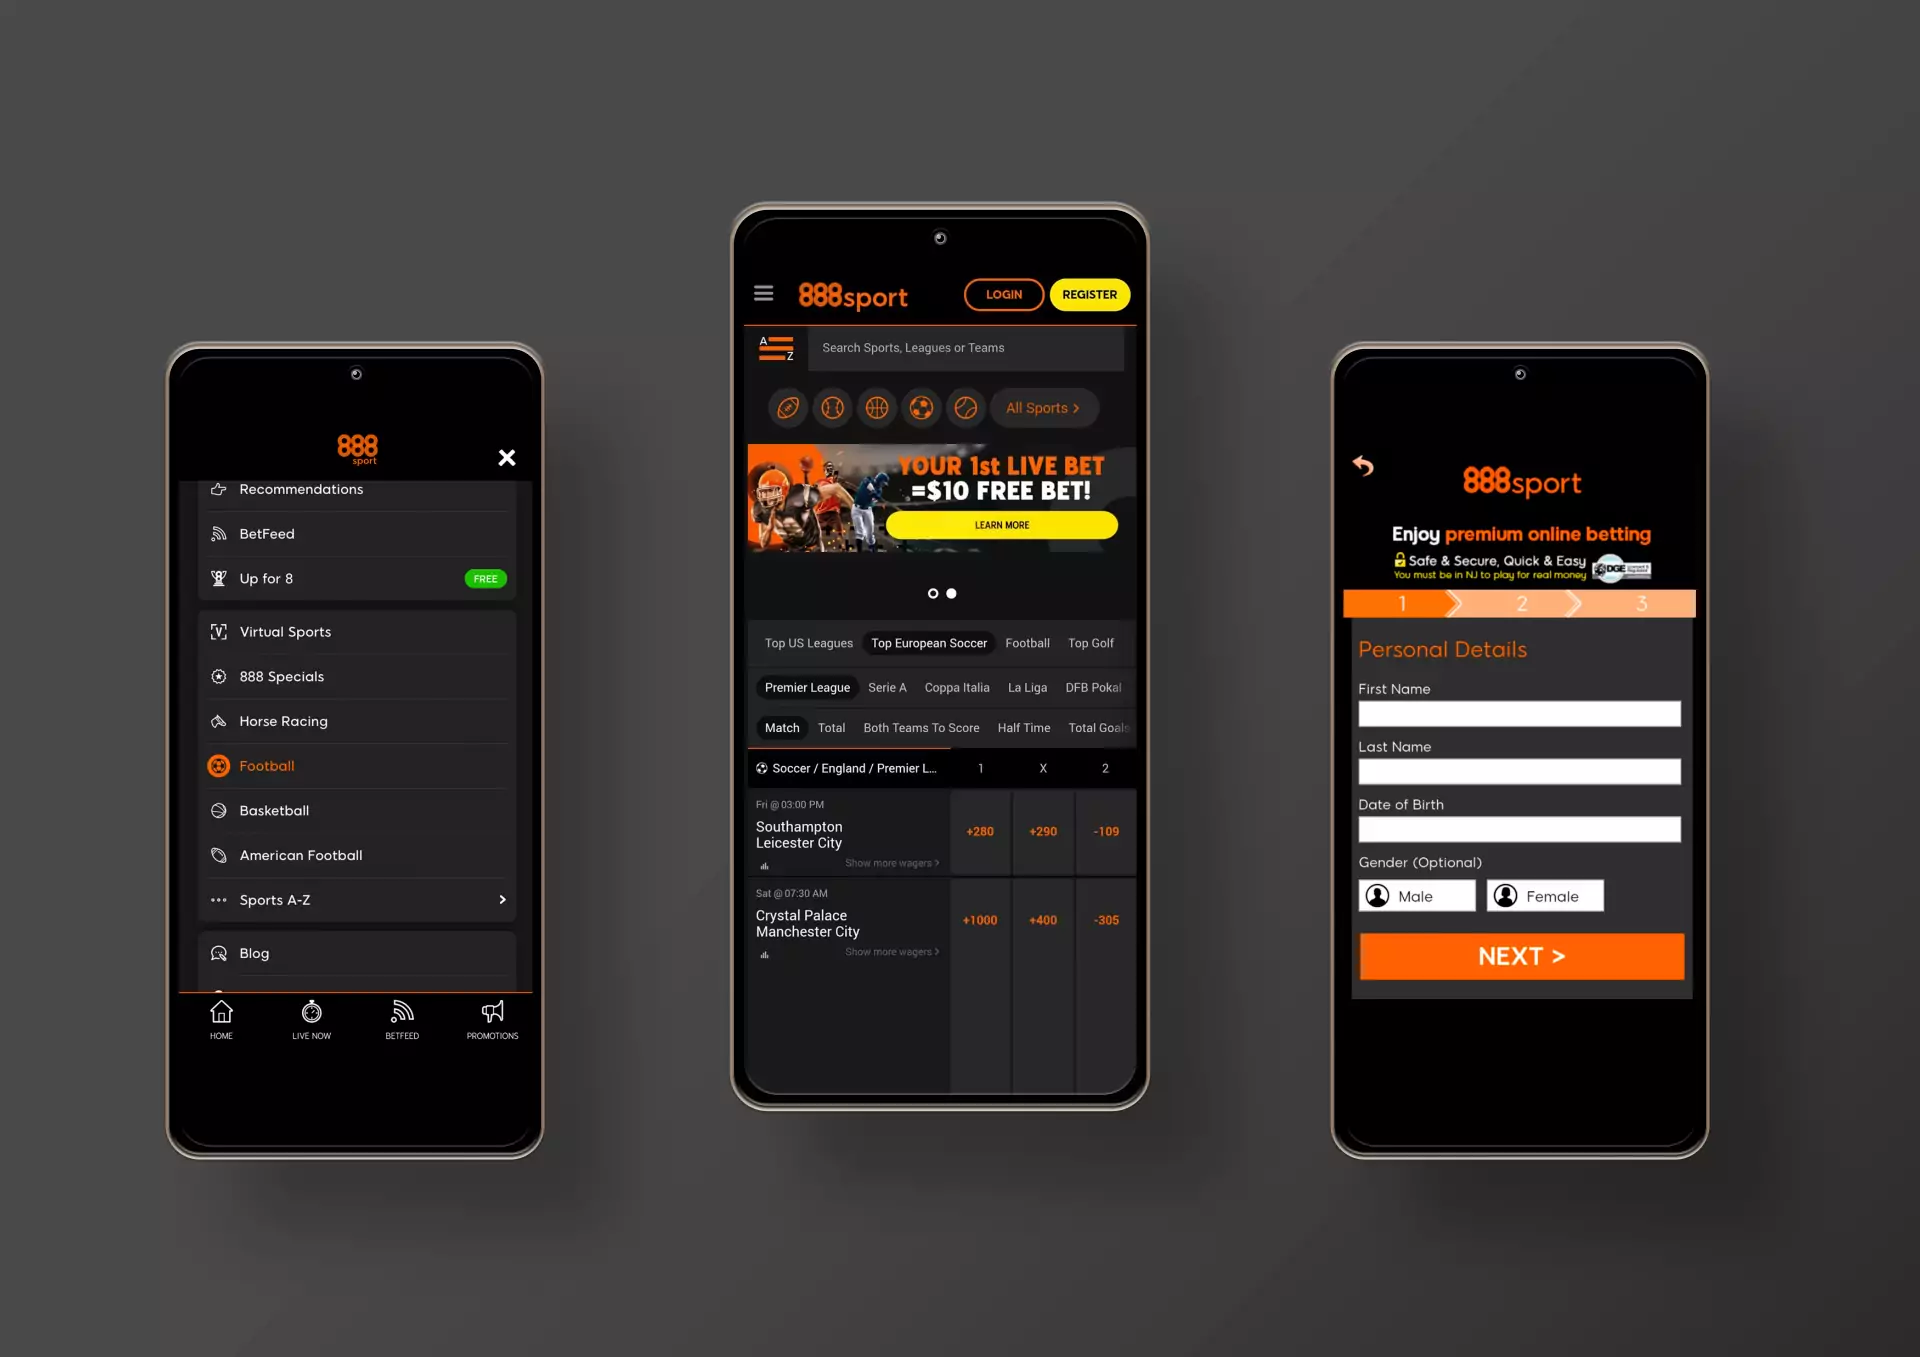 A big number of users like the 888sport app for betting.